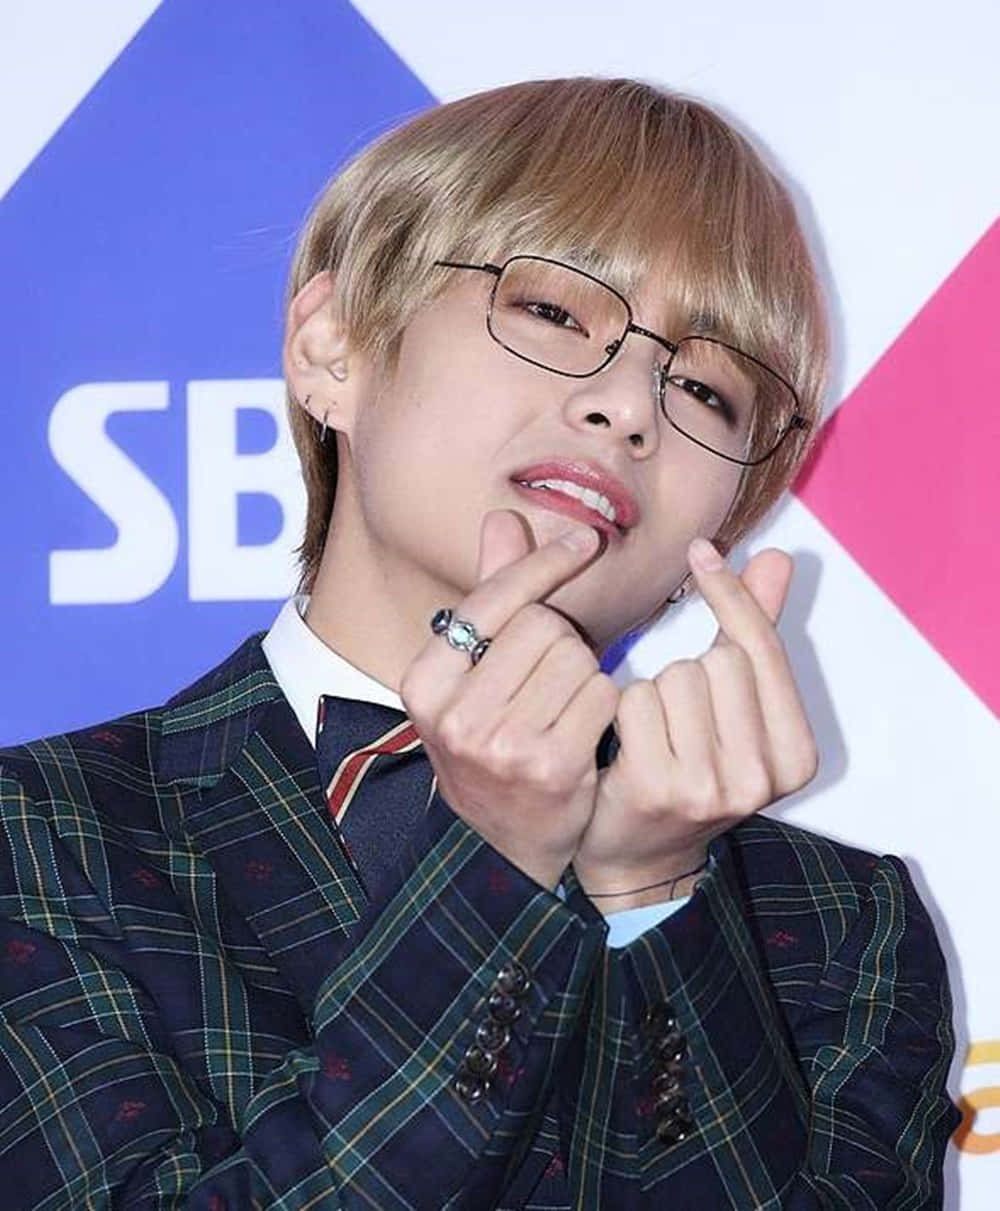 Btsfinger Heart Taehyung Would Be Translated To 